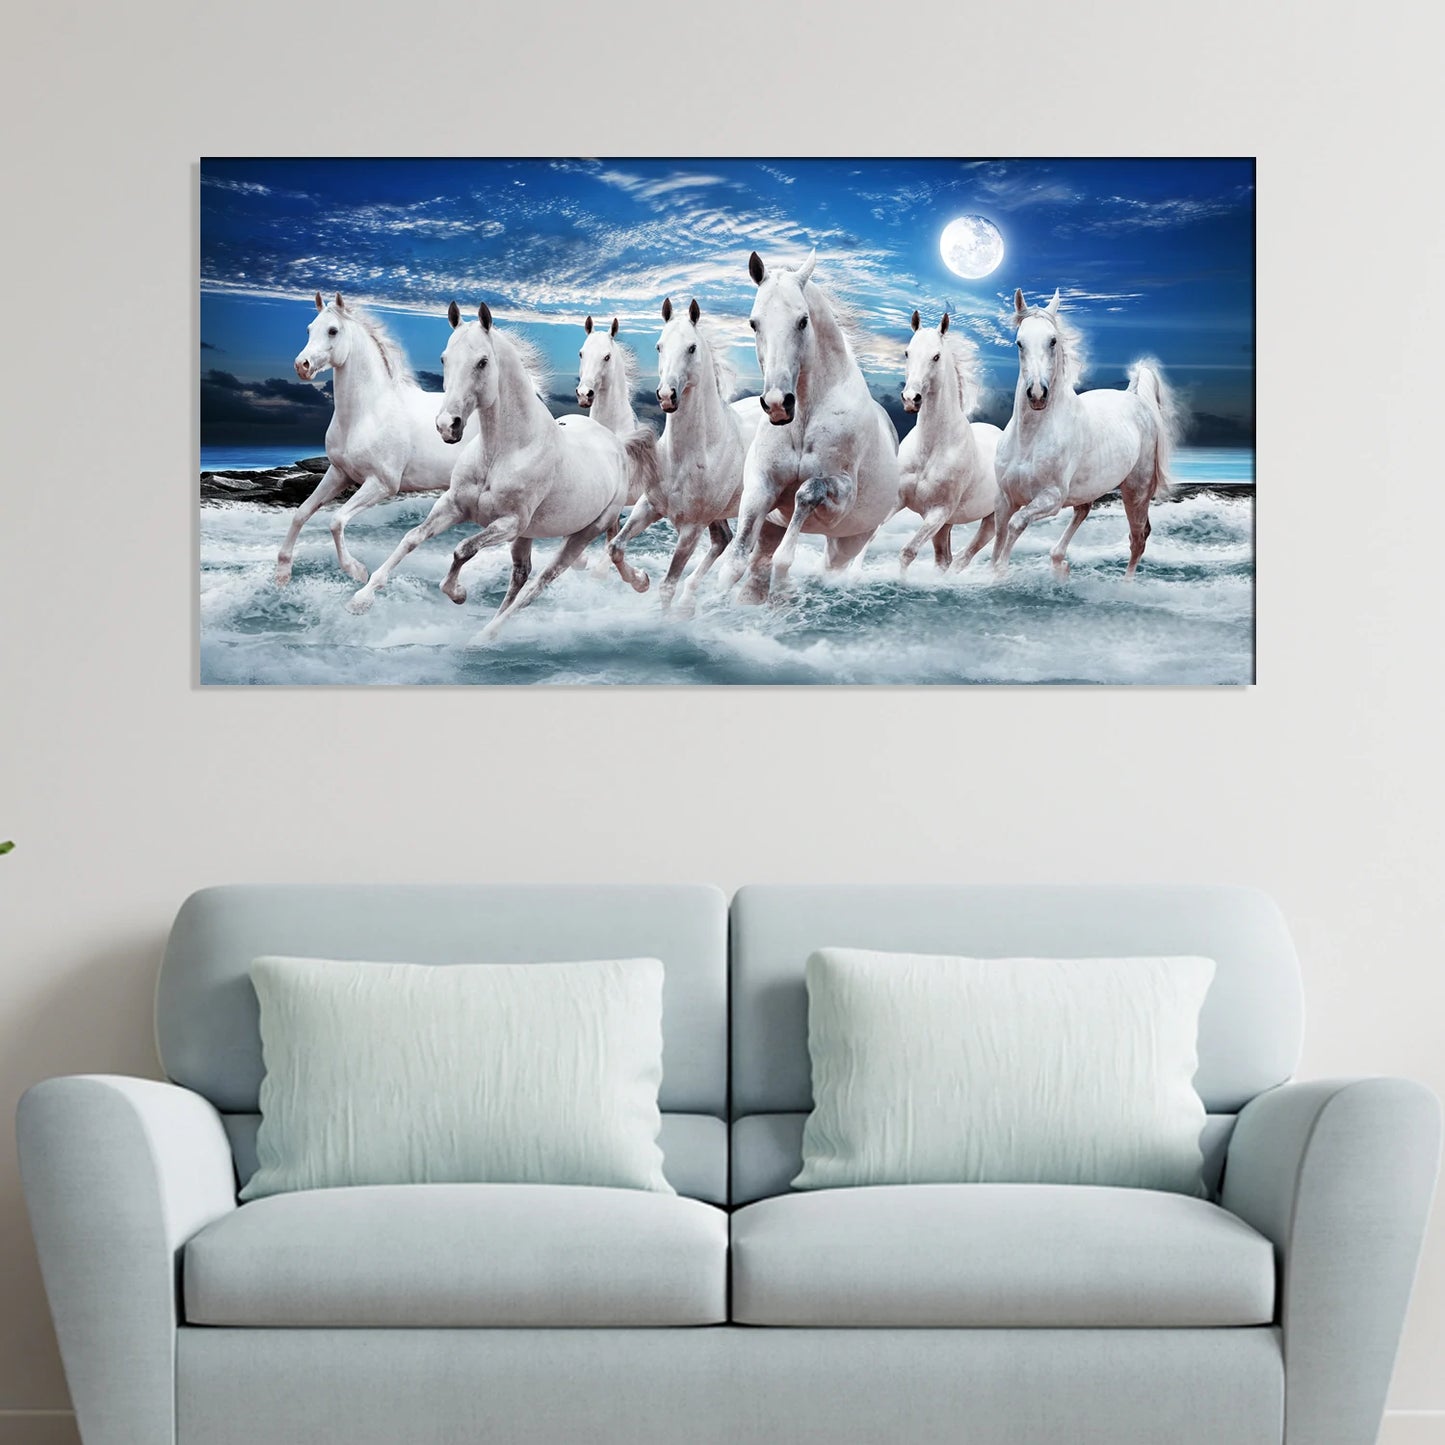 White Seven Horses Painting Canvas Wall Painting